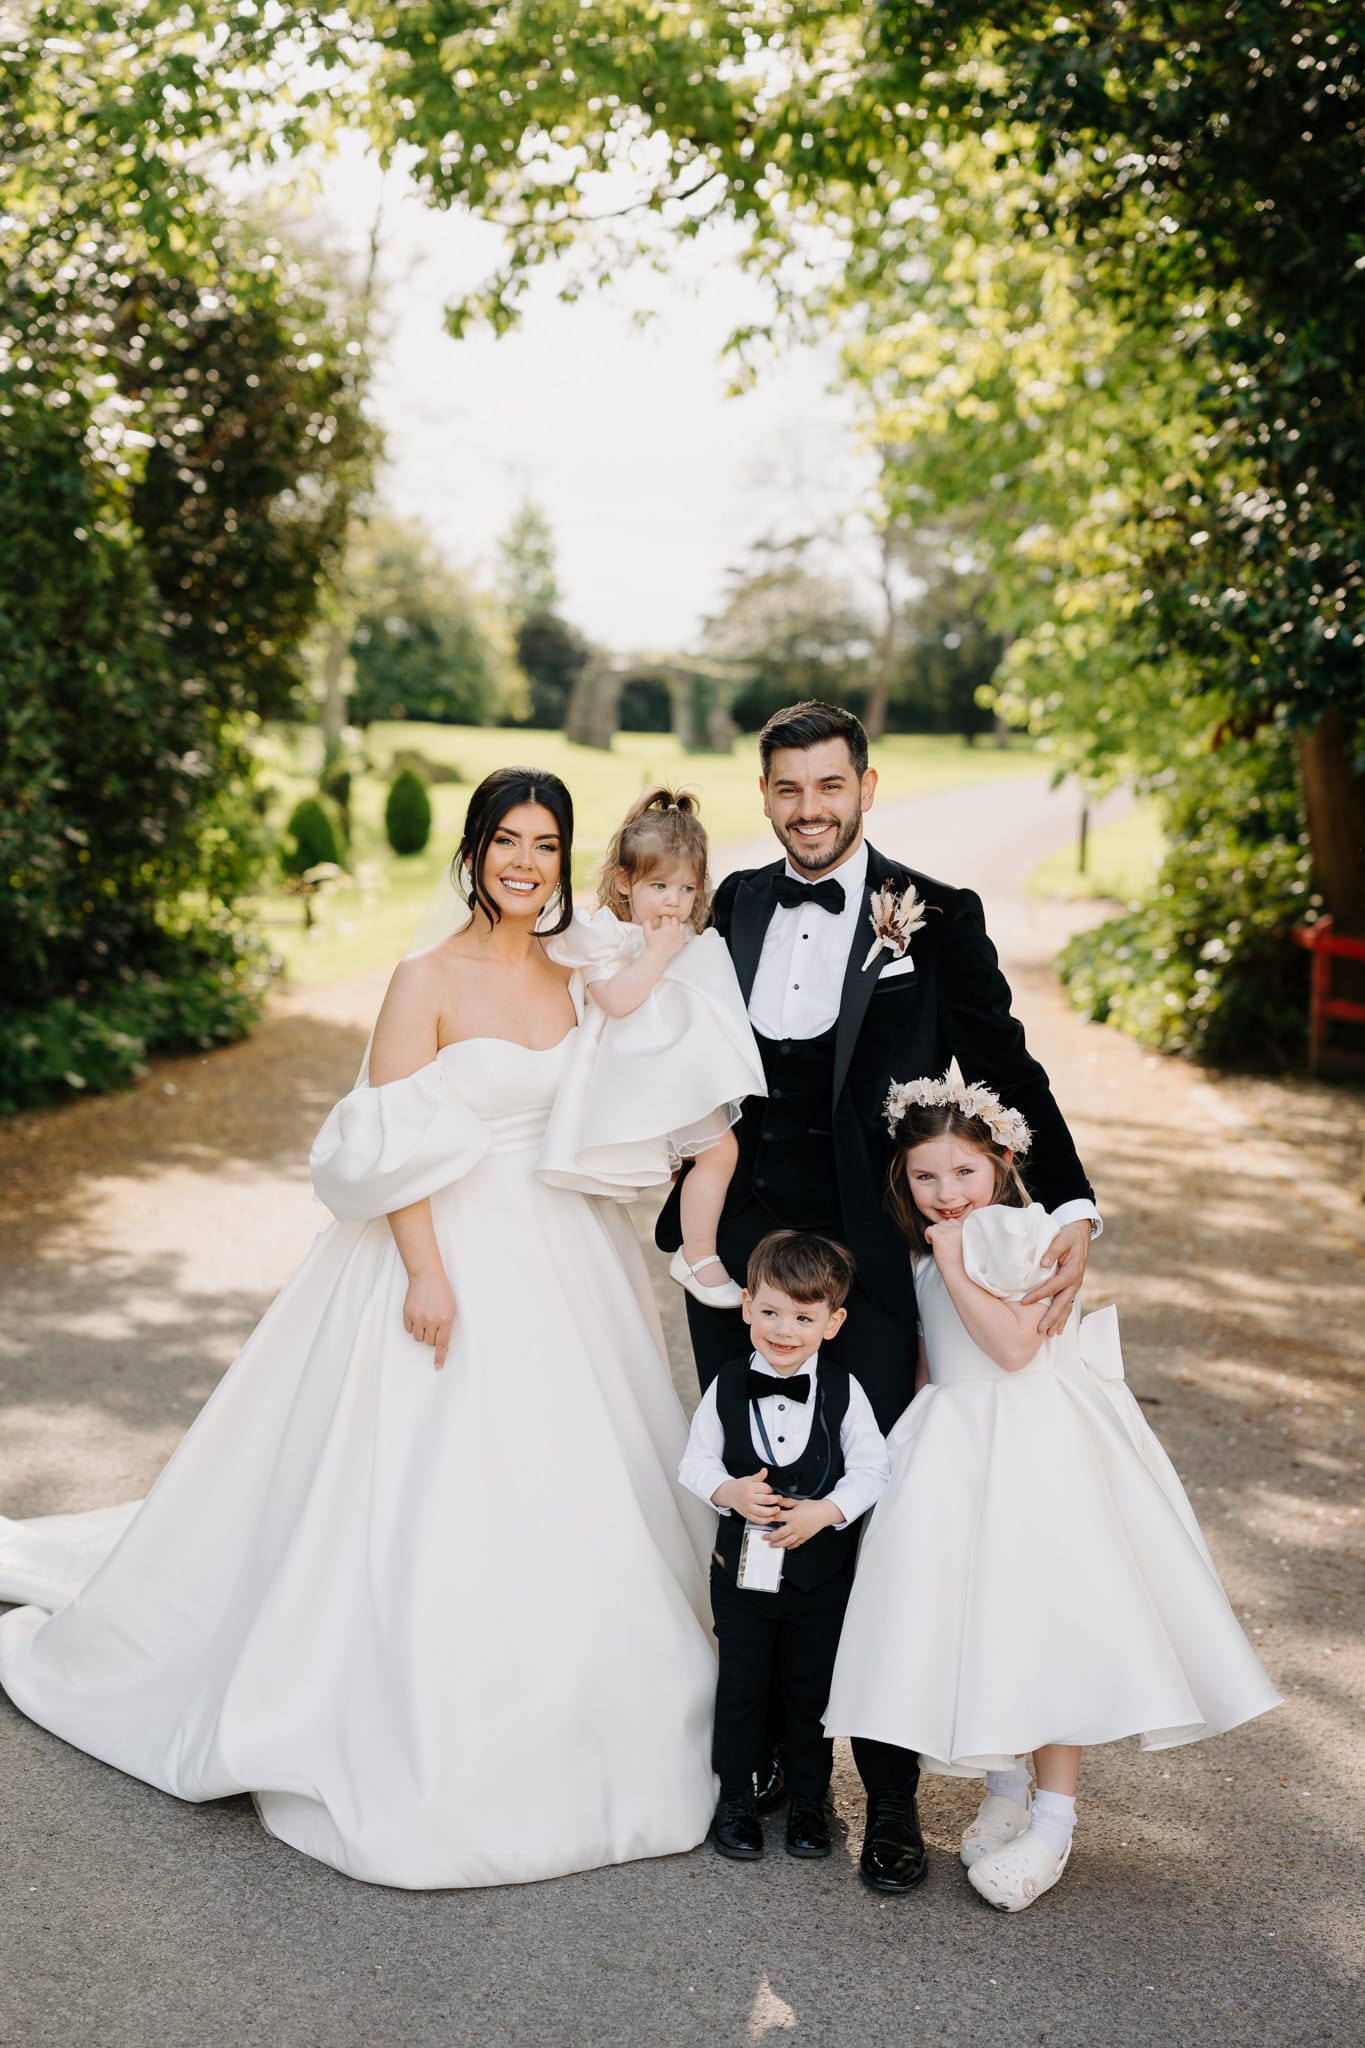 Influencer Roisin Doherty and Nick Irvine with children on their wedding day